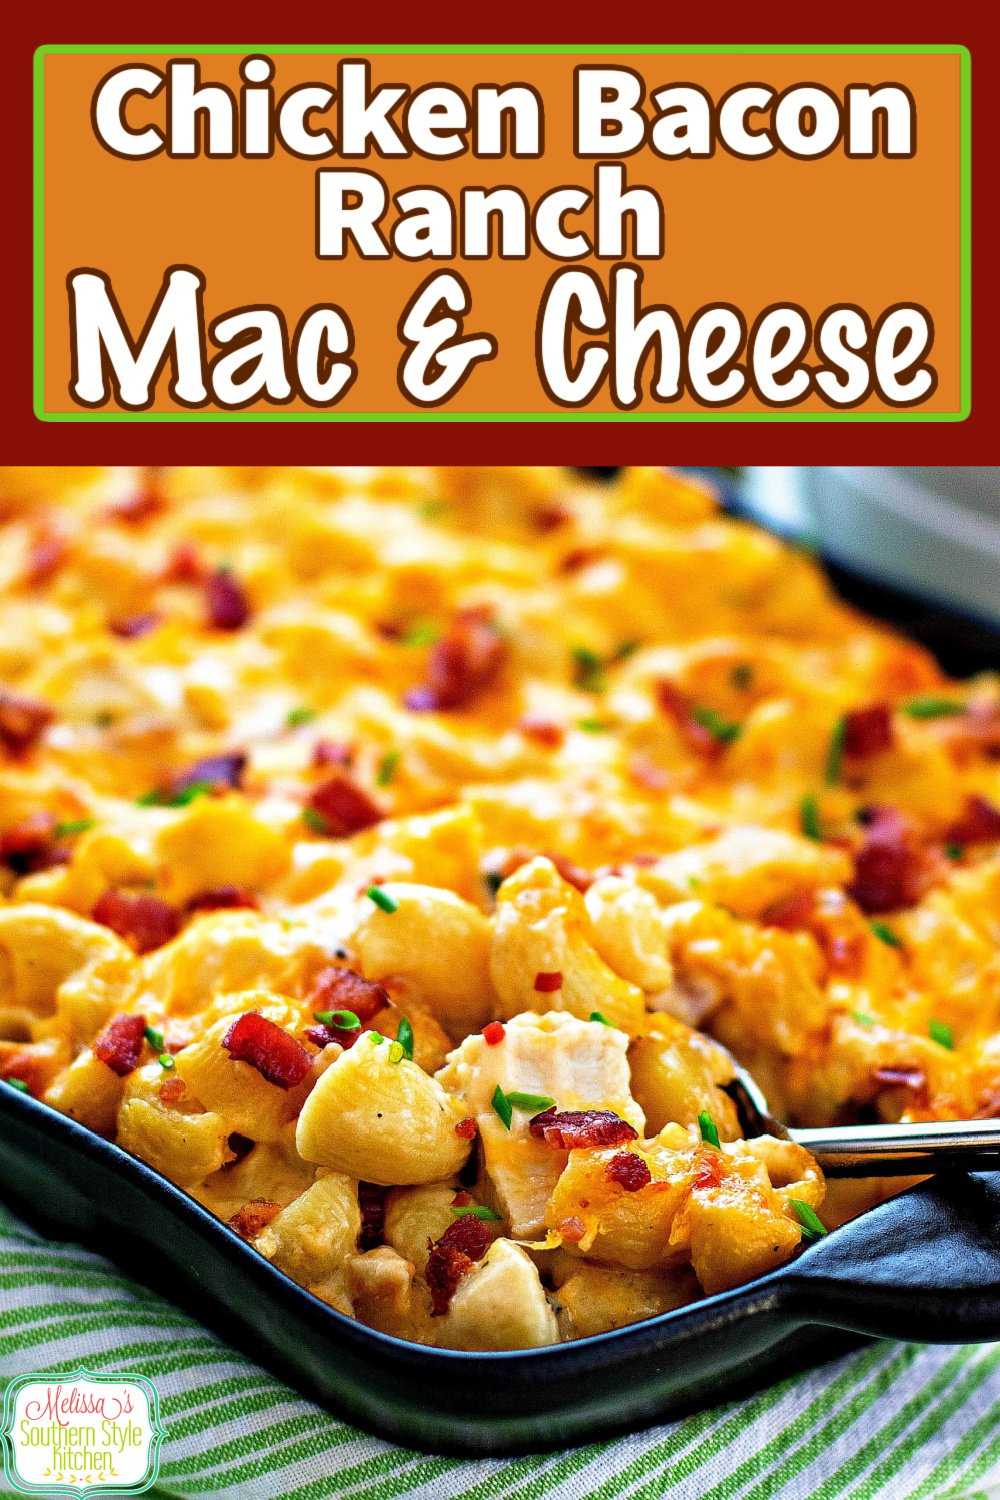 You'll take macaroni and cheese to another level when you turn it into this one dish meal #macaroniandcheese #macandcheese #chicken #chickenbaconranch #ranchdressing #cheese #casseroles #southernfood #southernrecipes via @melissasssk